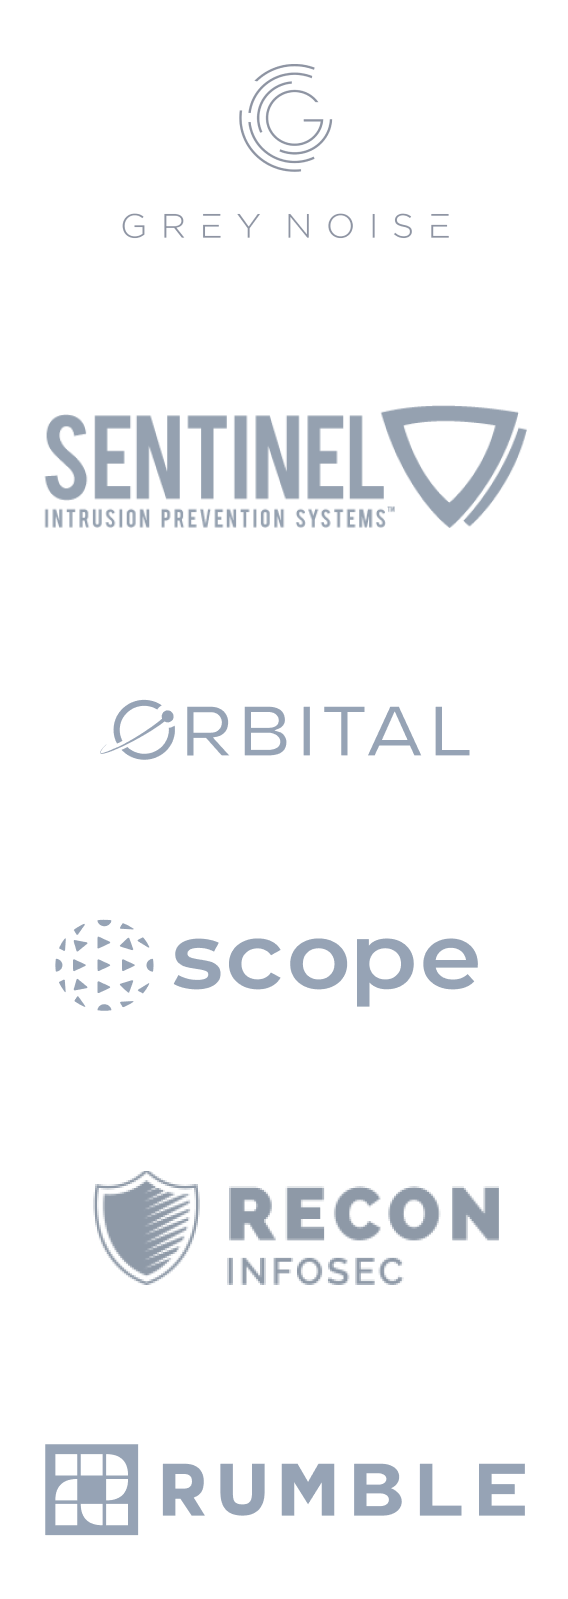 Our clients include Grey Noise, Sentinel Intrusion Prevention Systems, Orbital, Scope, Recon Infosec, and Rumble.